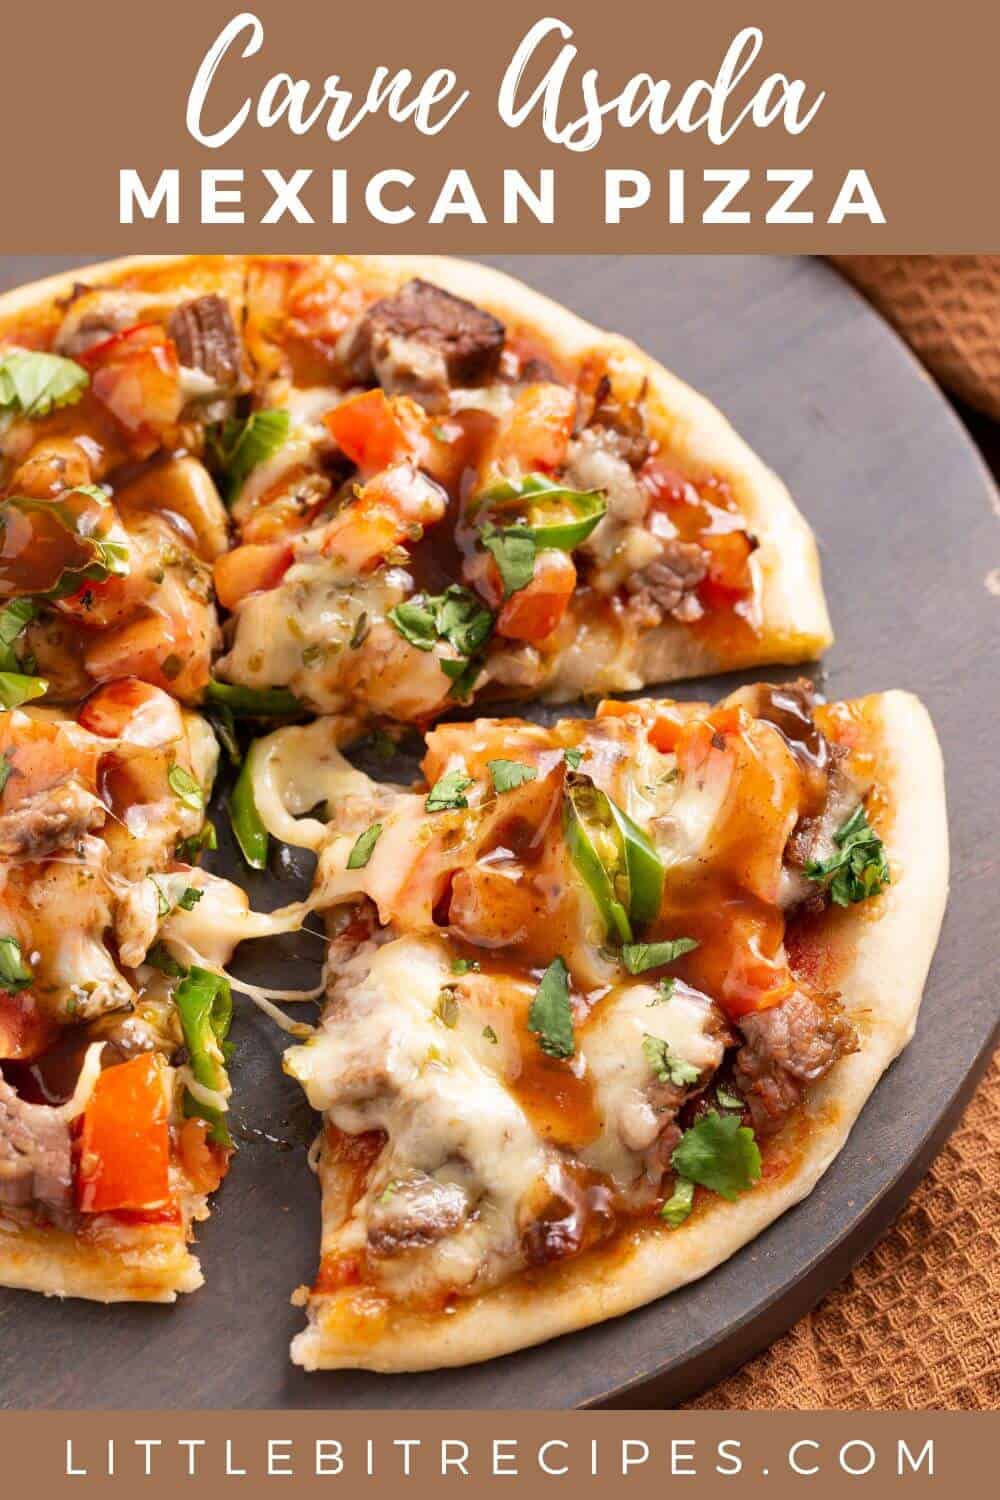 carne asada mexican pizza with text.